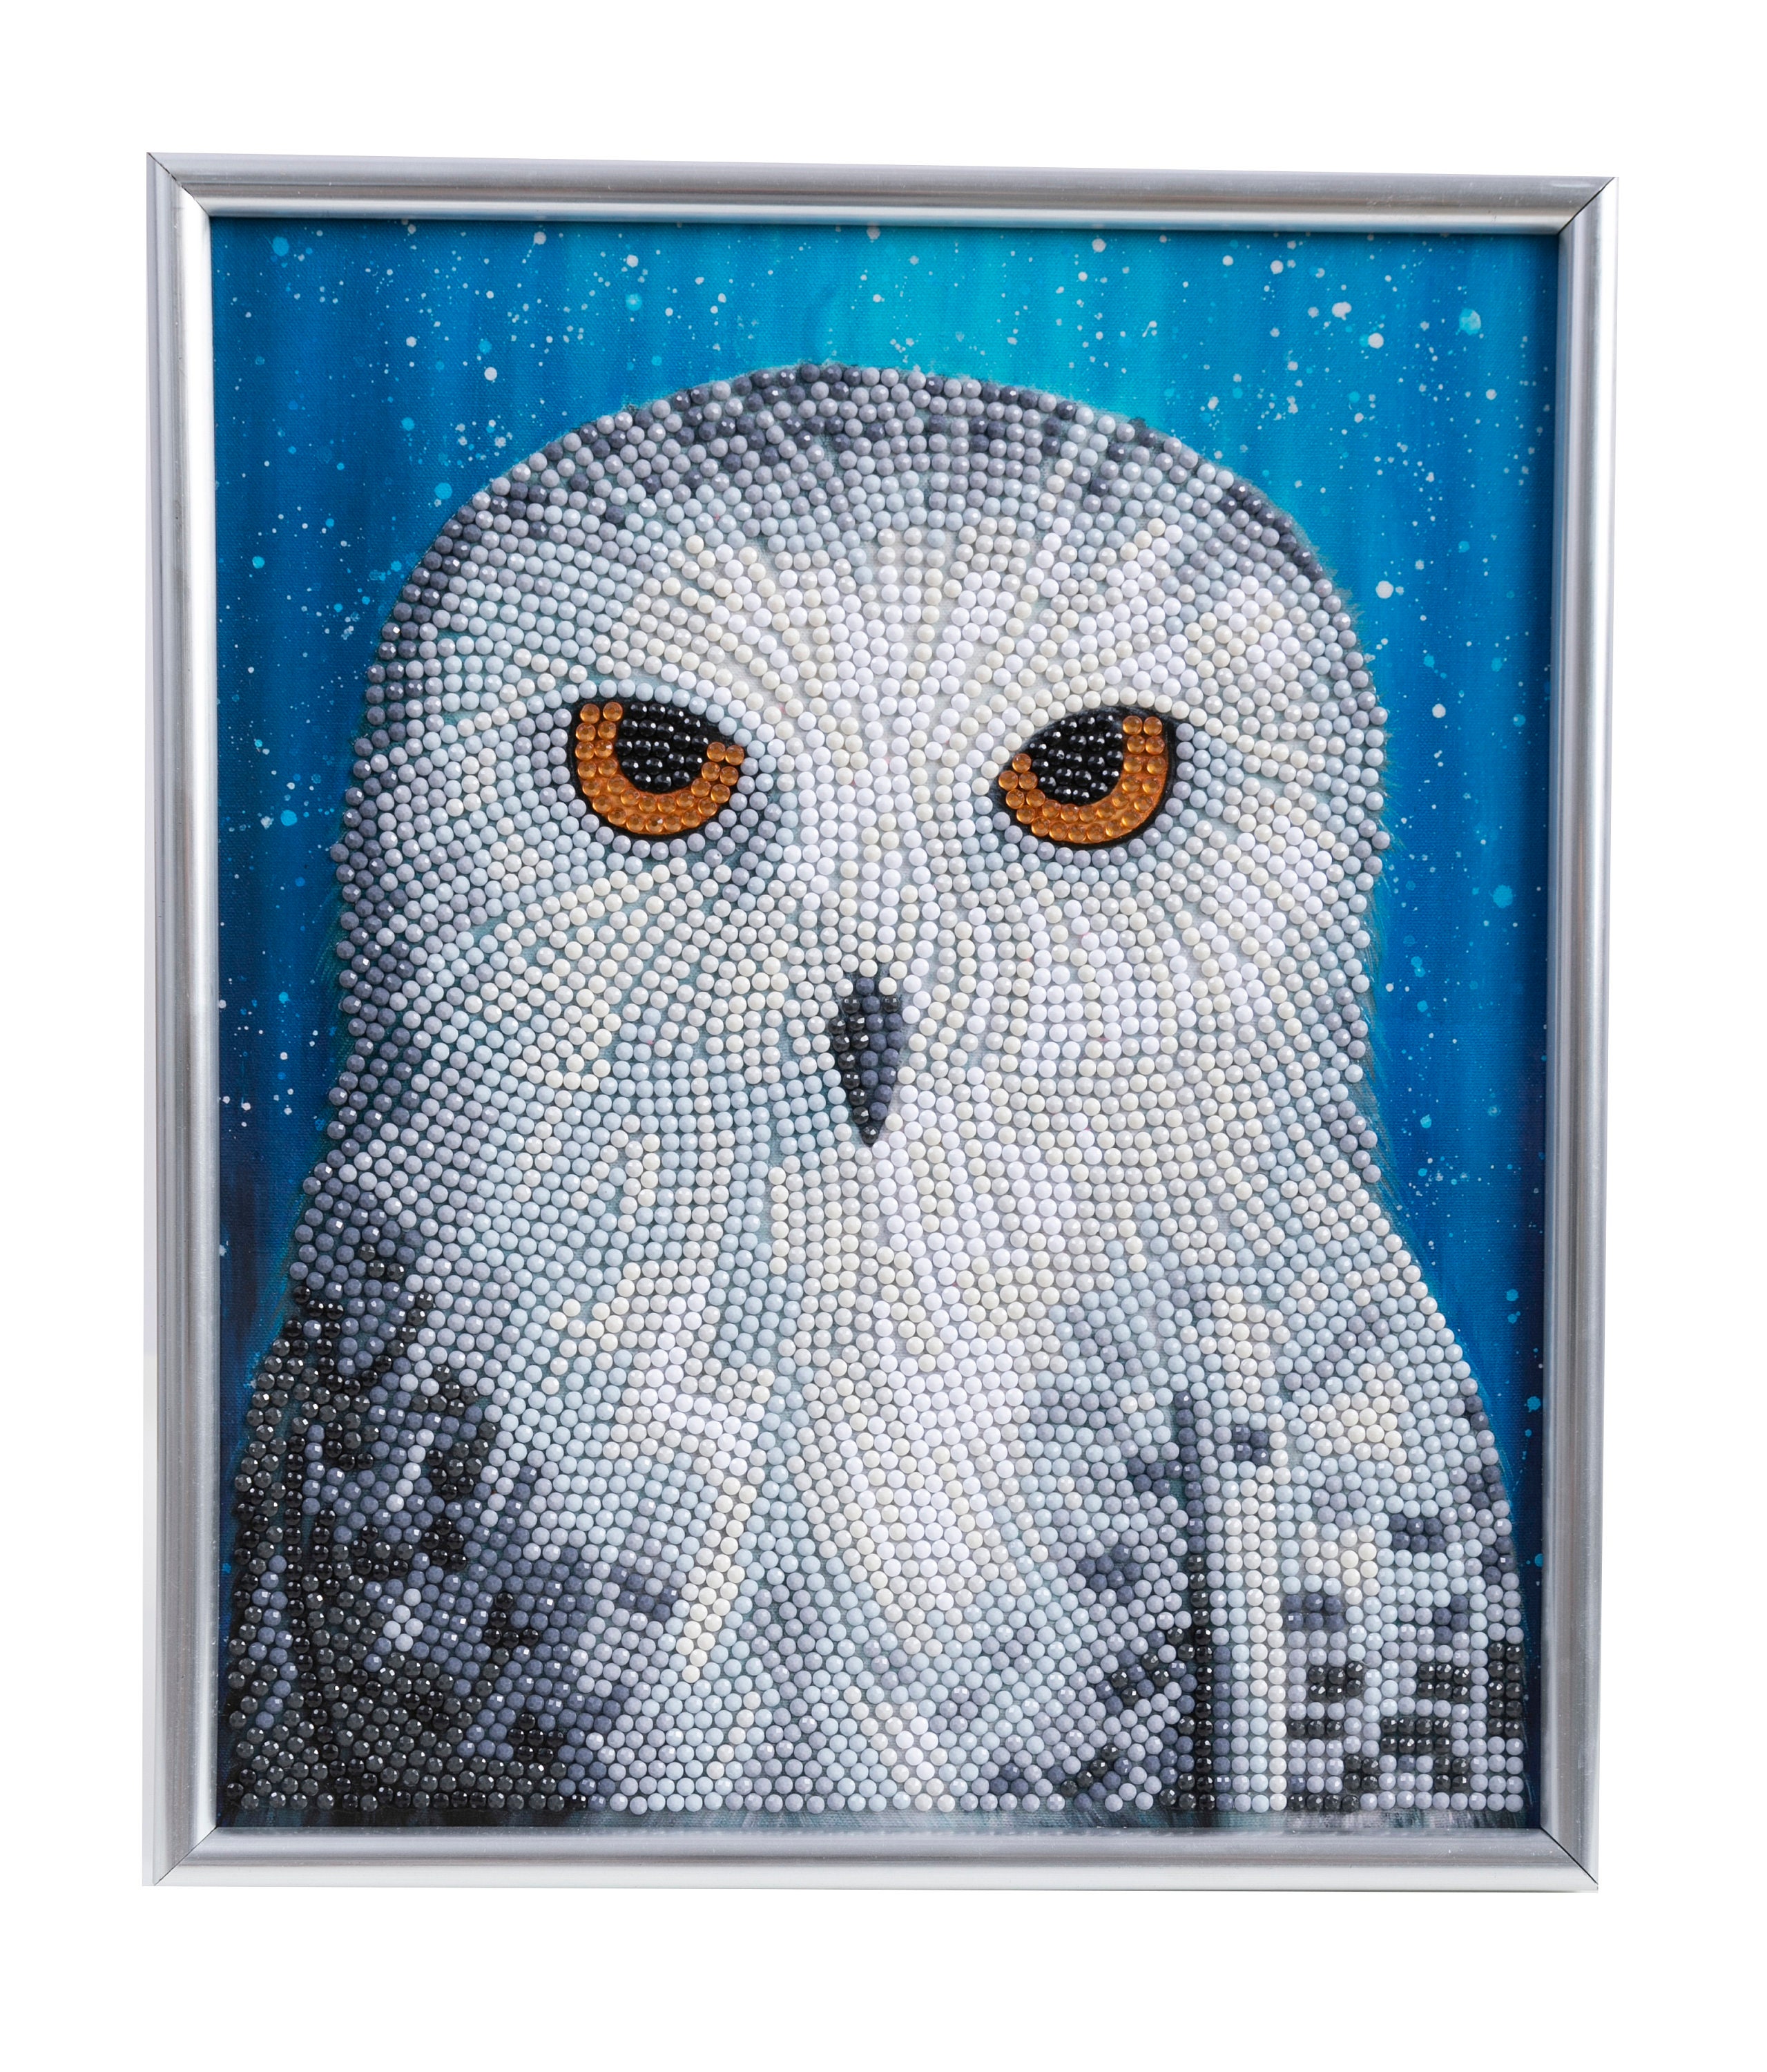 Diamond Painting Kit Complete Owl Special Shaped Beads 11x 11